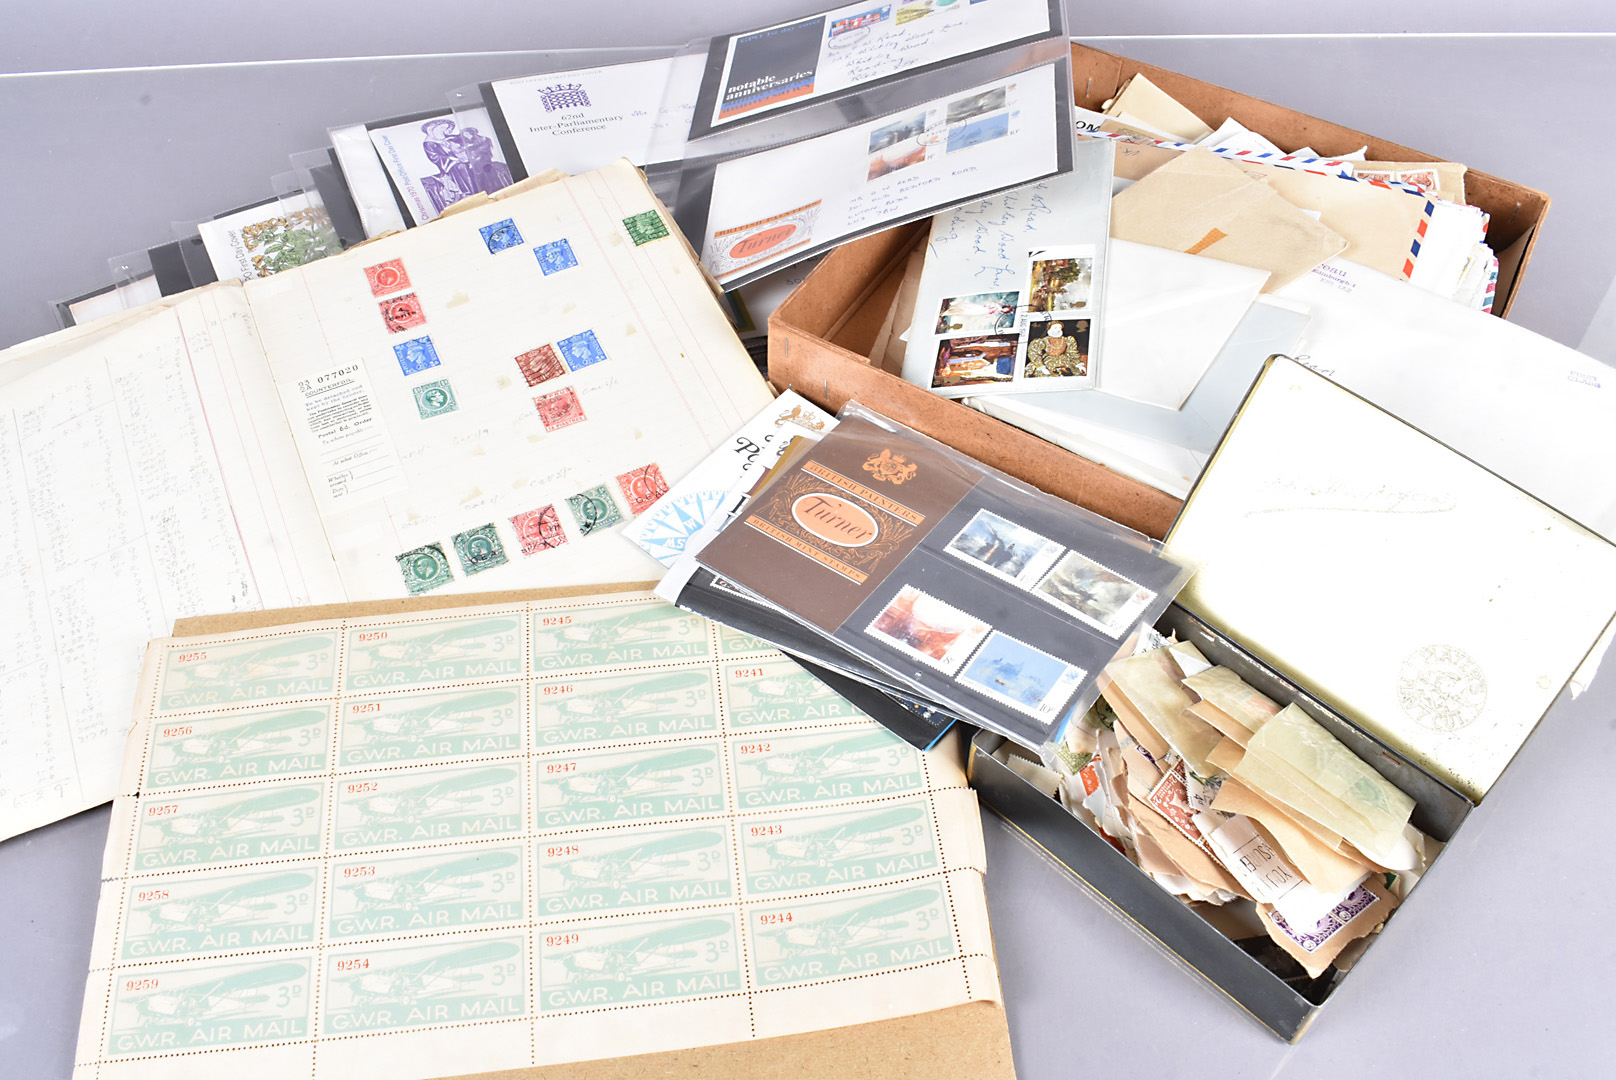 A collection of loose stamps and FDCs, including a sheet of GWR Airmail stamps, British and Overseas